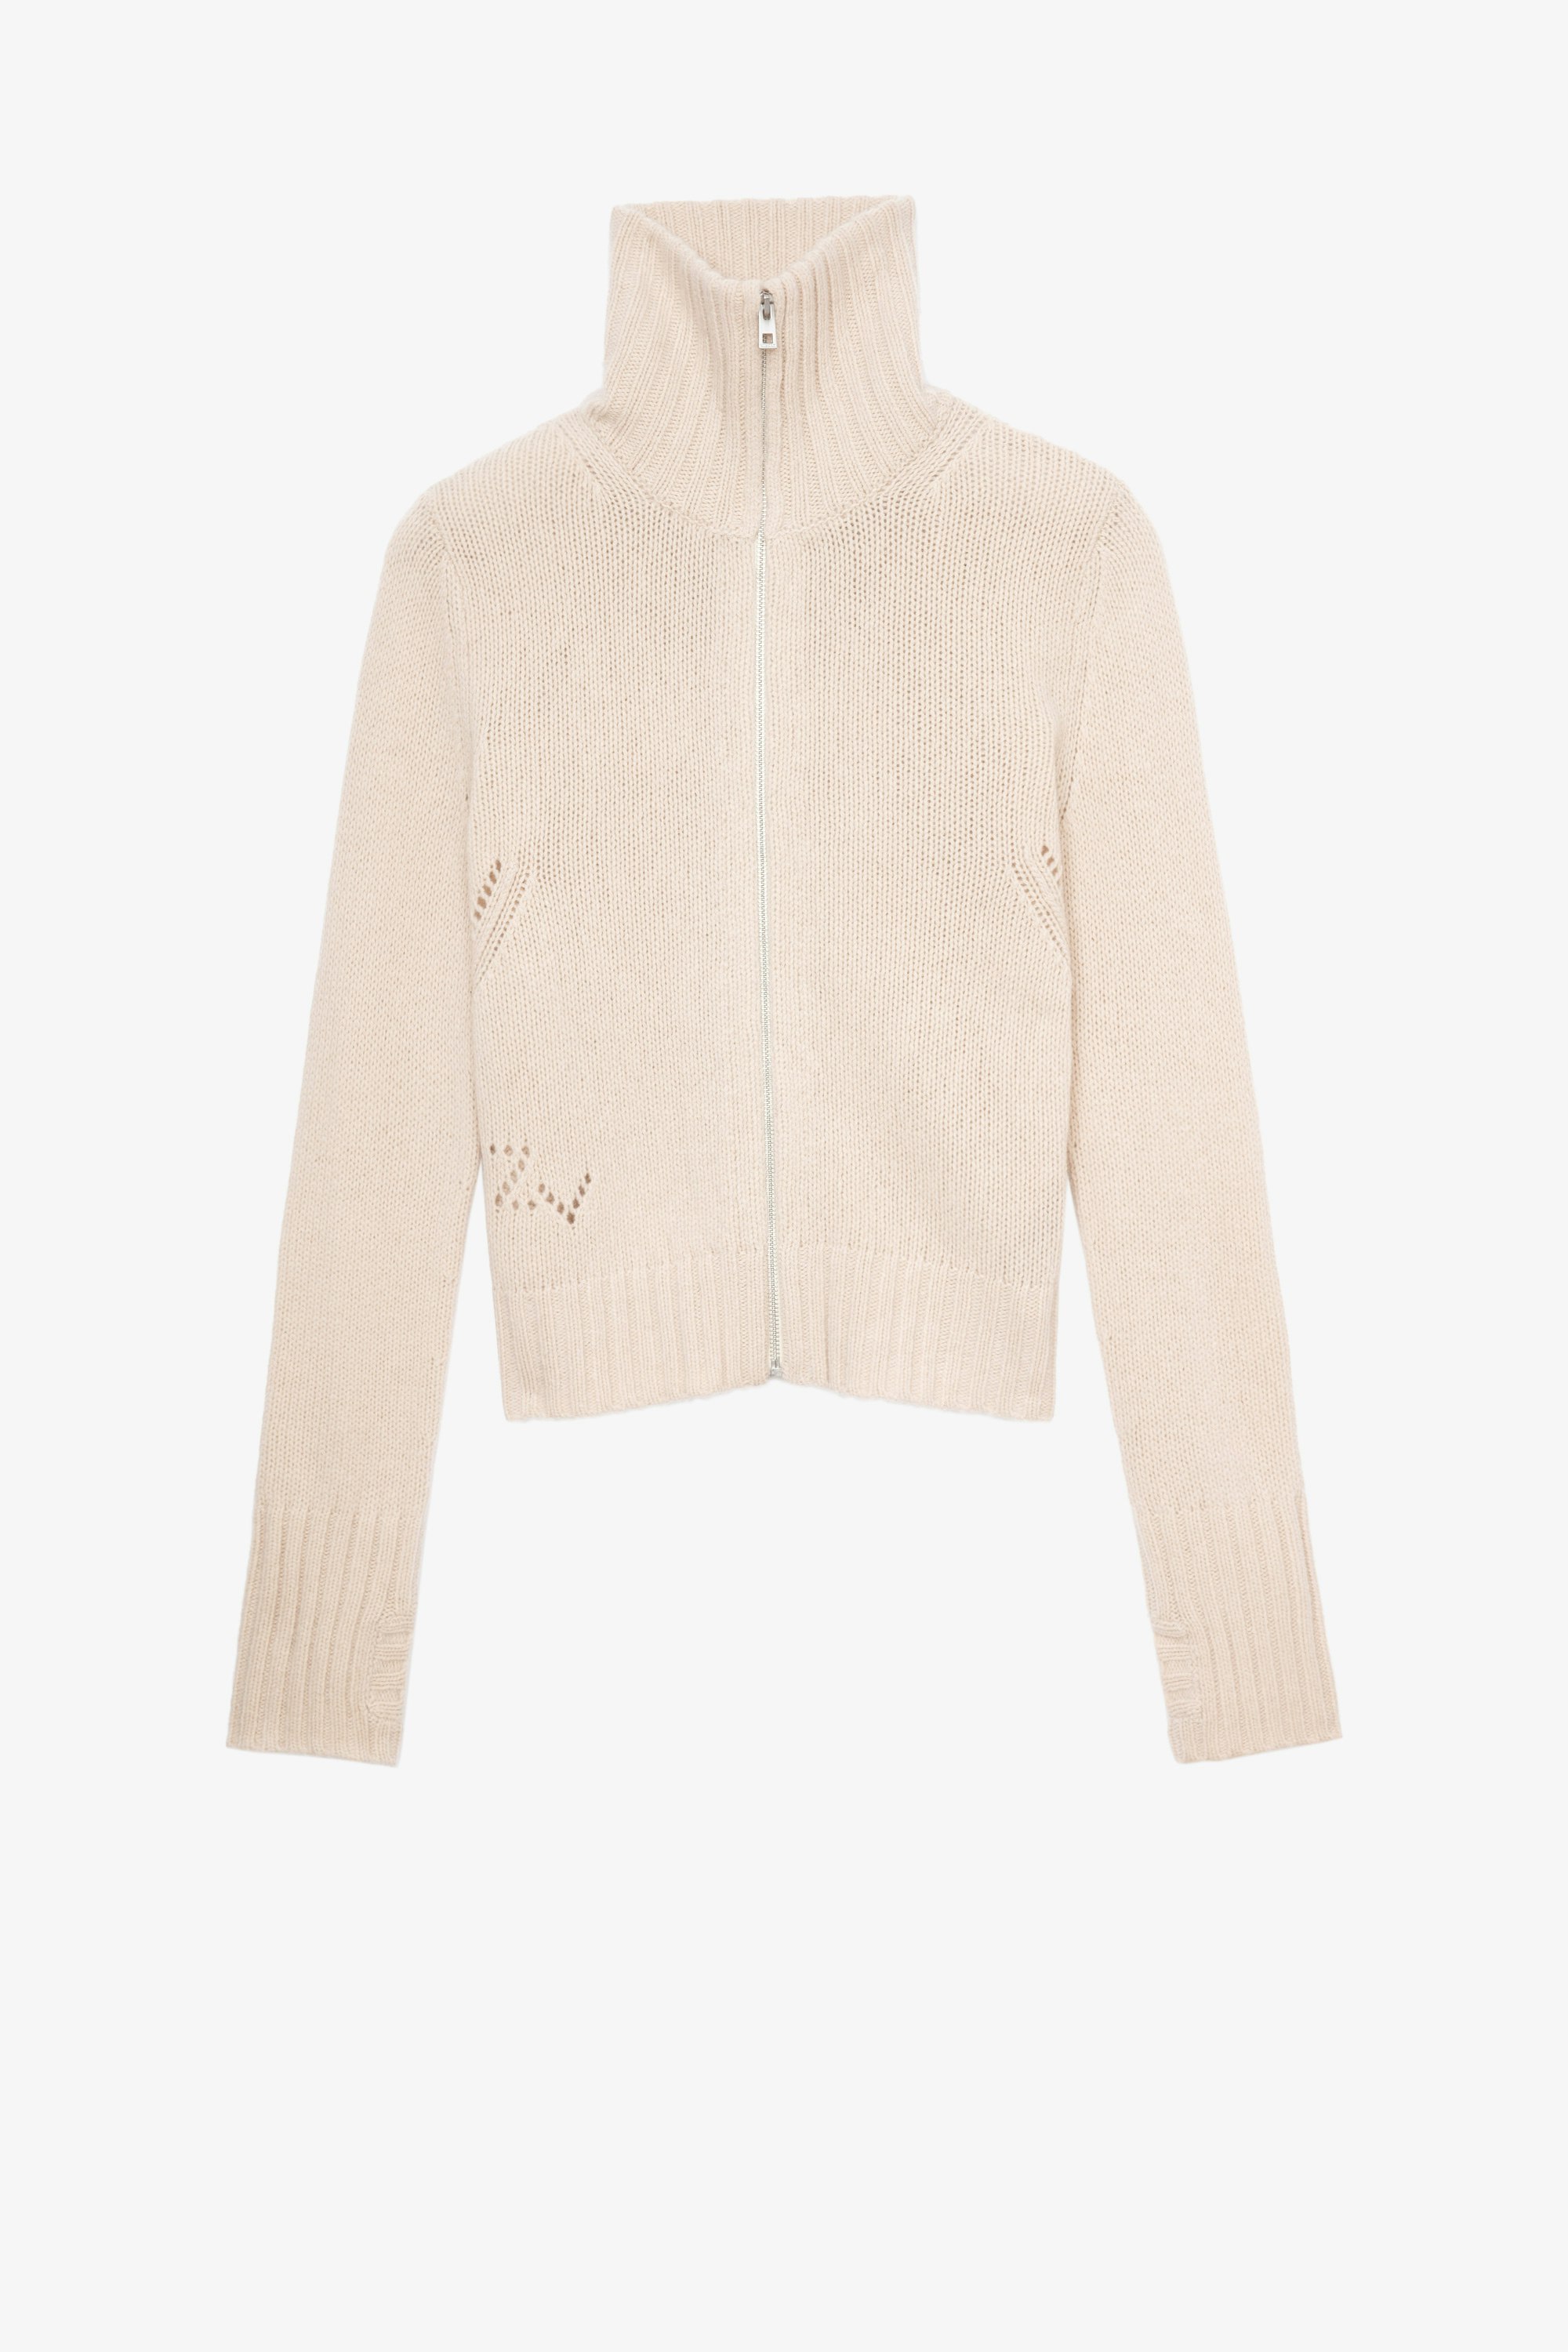 Gilda カーディガン Women’s beige knit zip-up cardigan with stand collar and flocking on the back